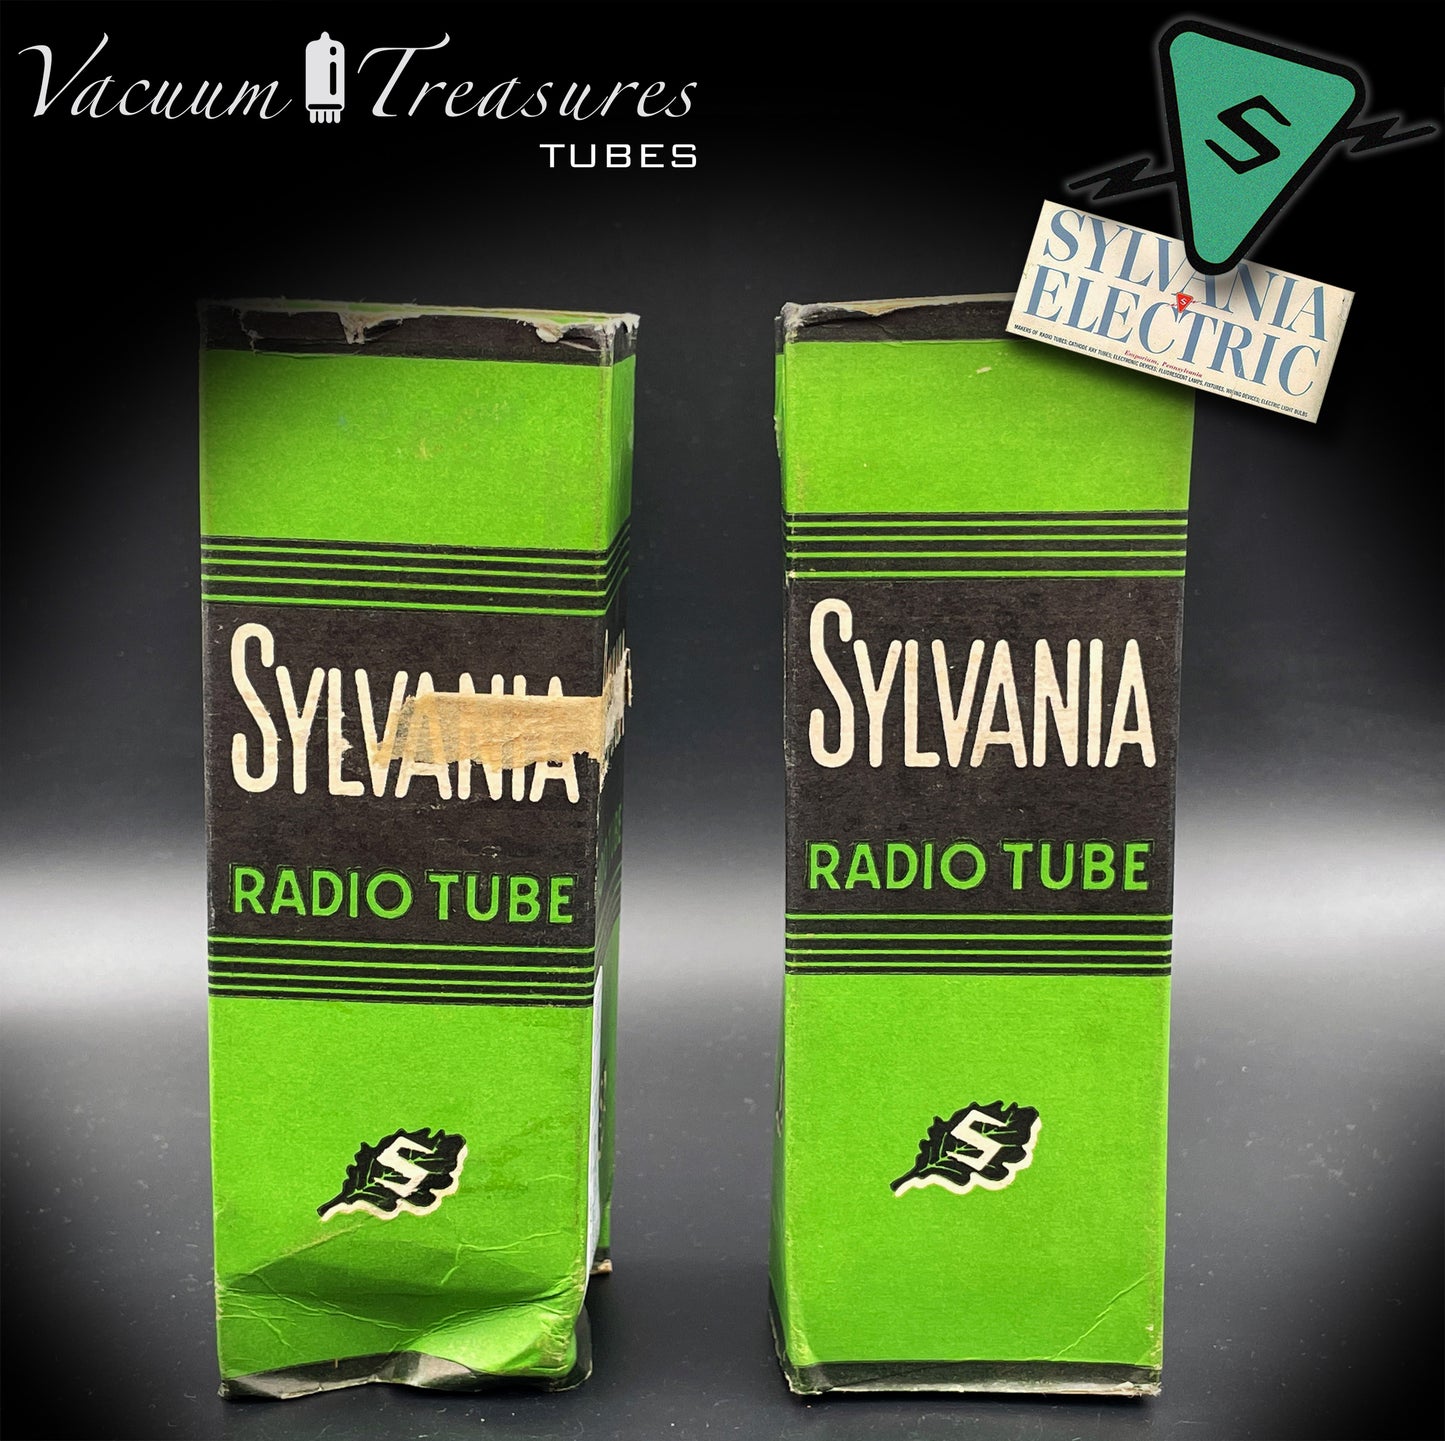 2A3 ( VT-95 ) SYLVANIA NOS NIB Hanging Filament Black Plates Foil Getter Matched Tubes Made in USA '40s